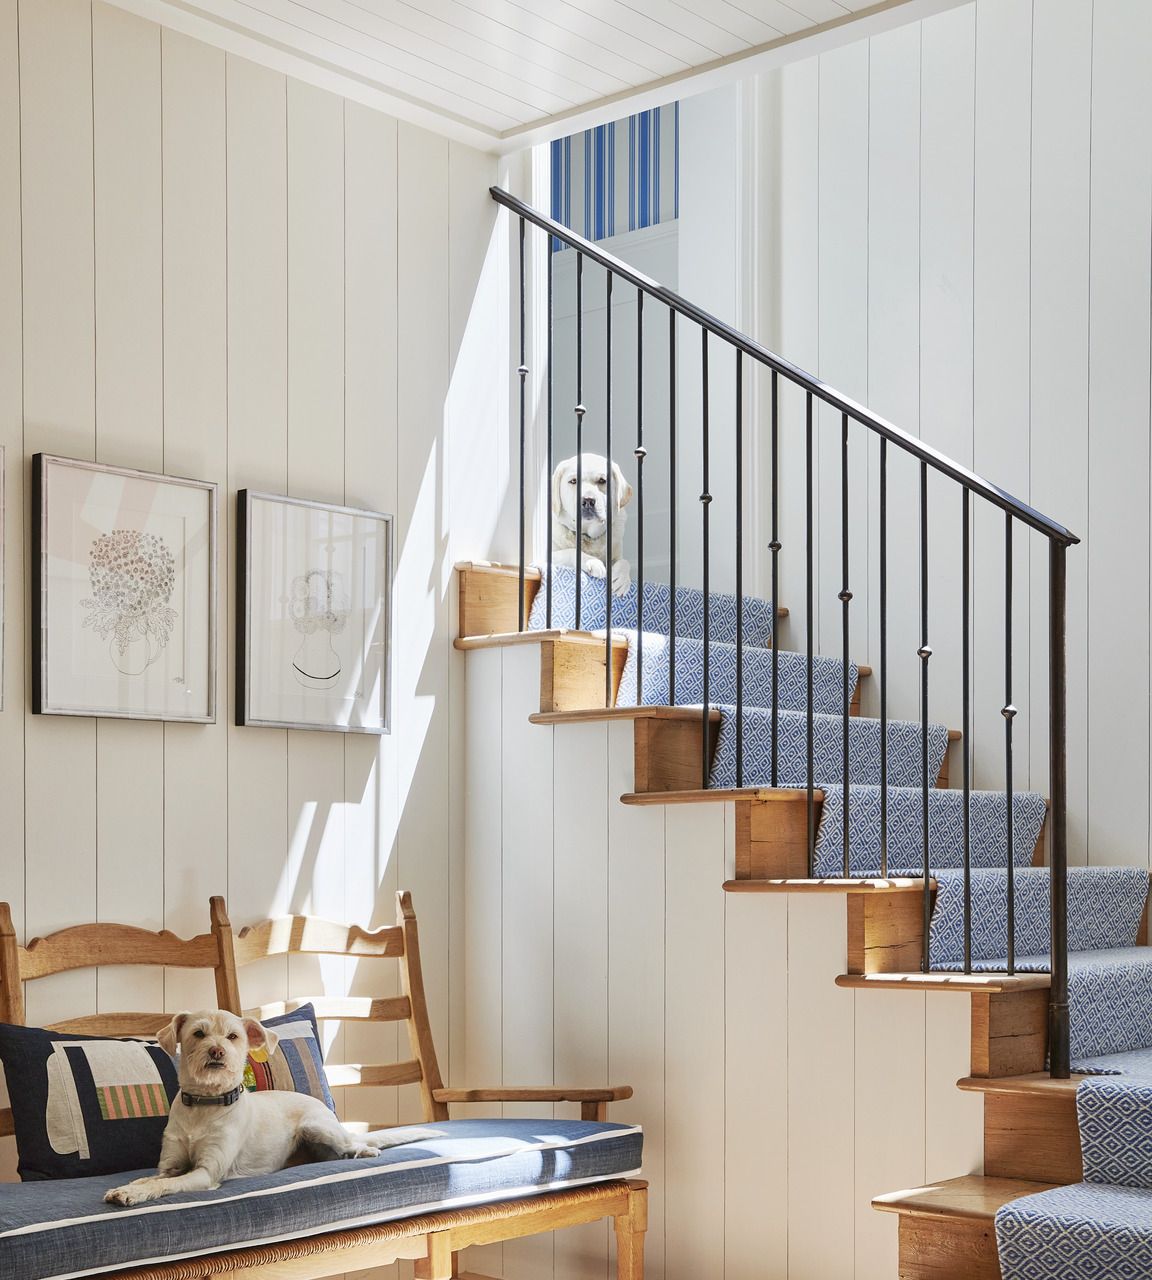 landing
a staircase leads to the lowerlevel
children’s rooms runner
elizabeth eakins bench 1stdibs
pillow the future perfect
rug patterson flynn martin
artwork nickey kehoe